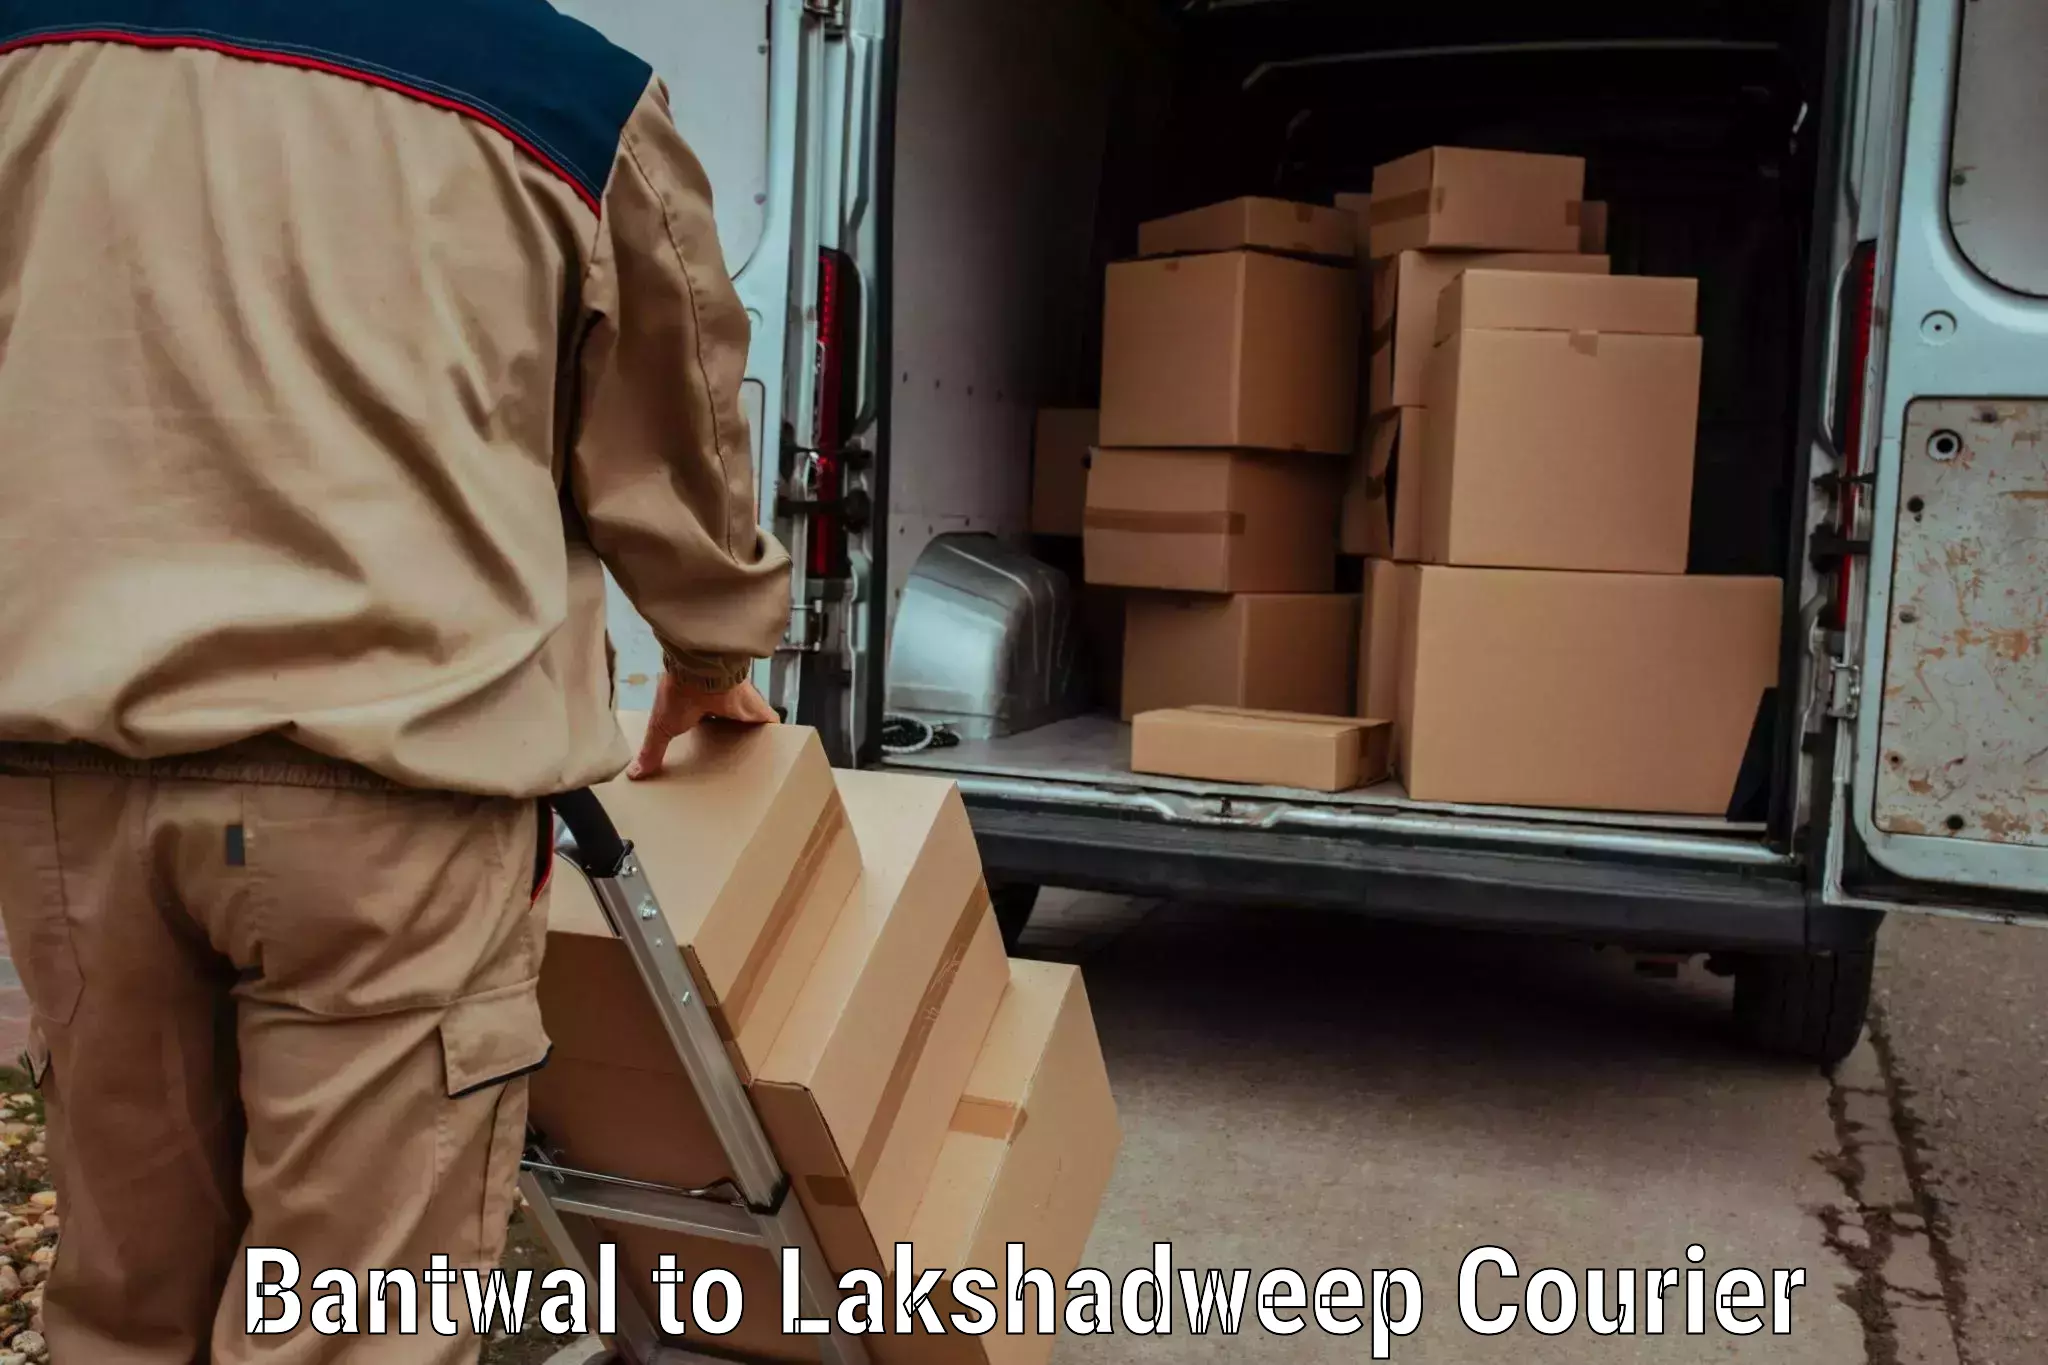 Express delivery capabilities Bantwal to Lakshadweep